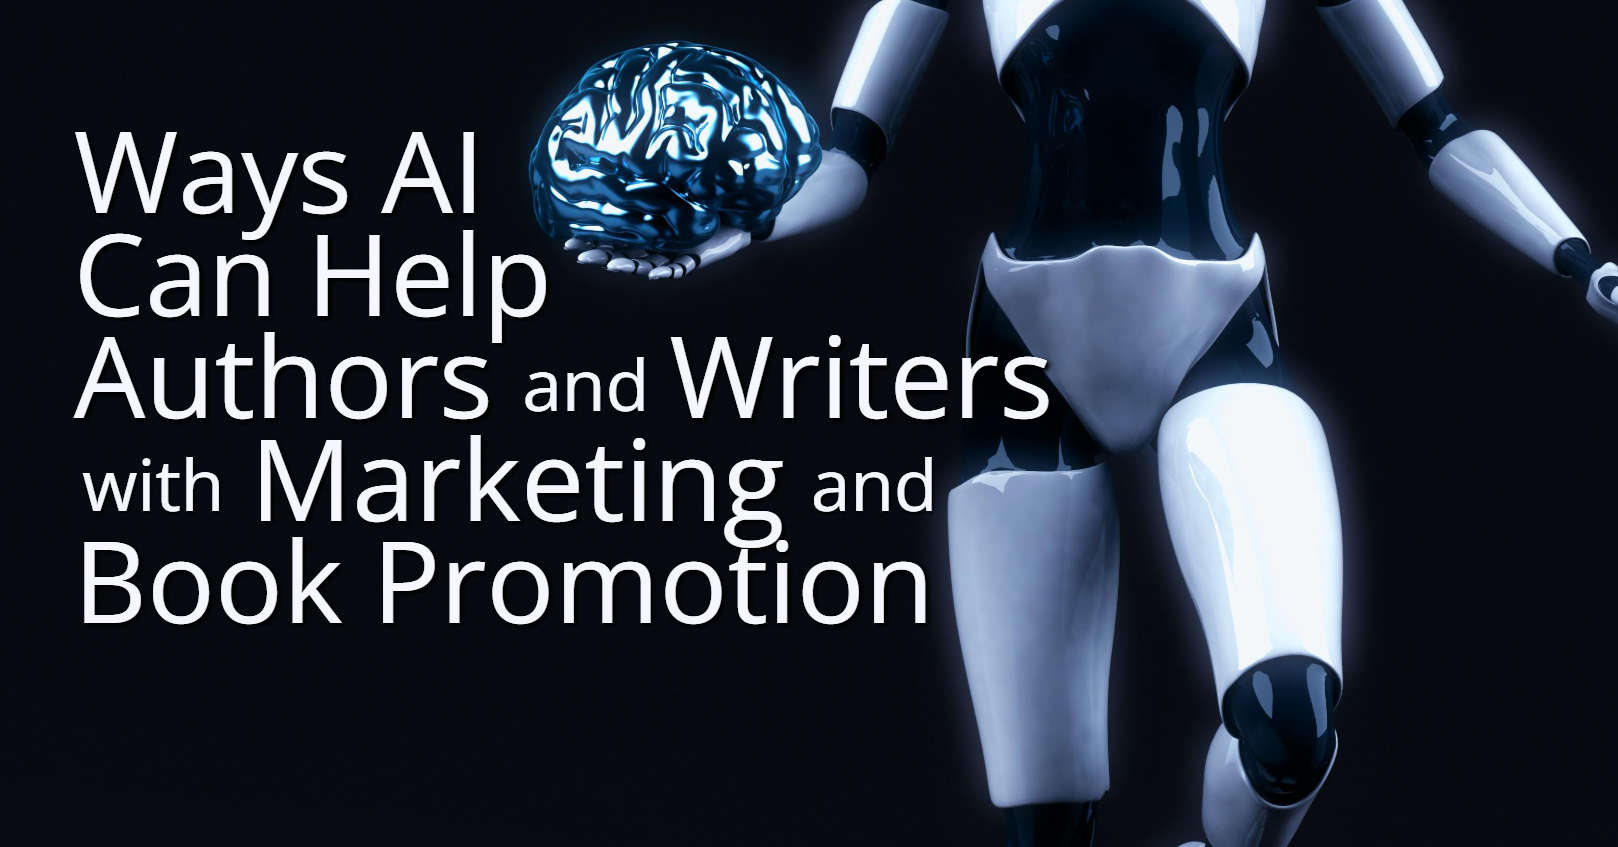 Ways AI Can Help Authors and Writers with Marketing and Book Promotion